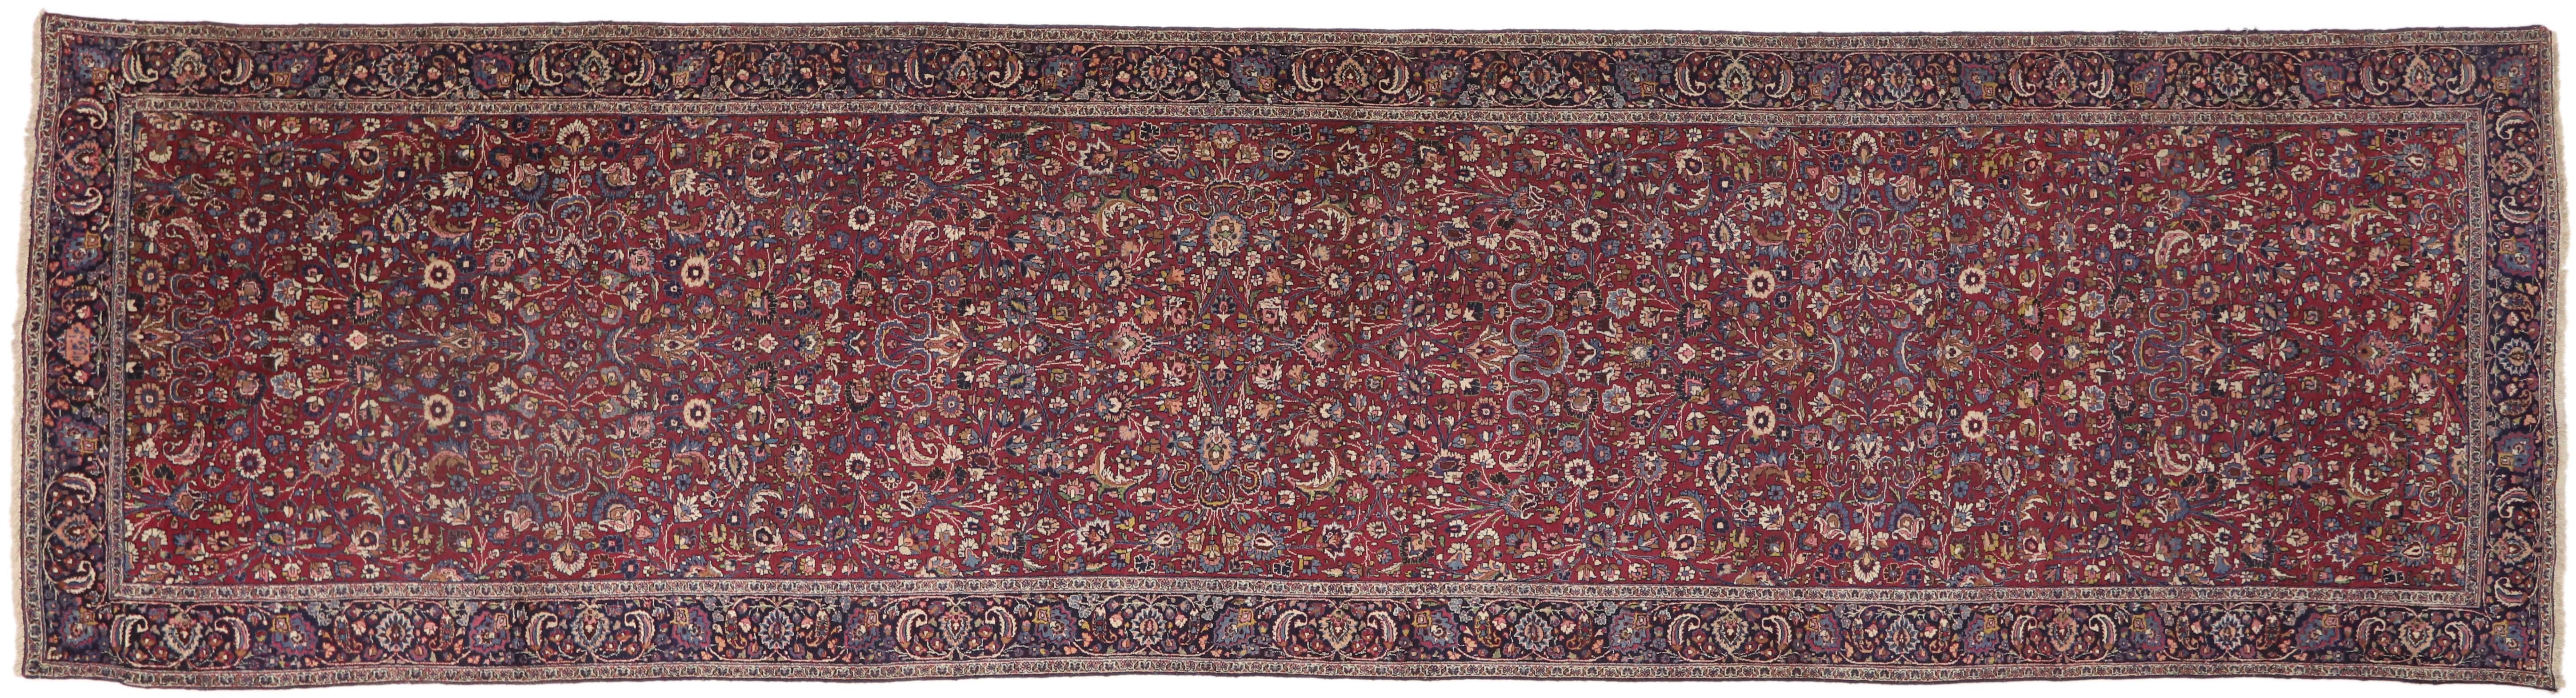 Wool Antique Persian Mashhad Runner with Old World Style, Extra-Long Hallway Runner For Sale